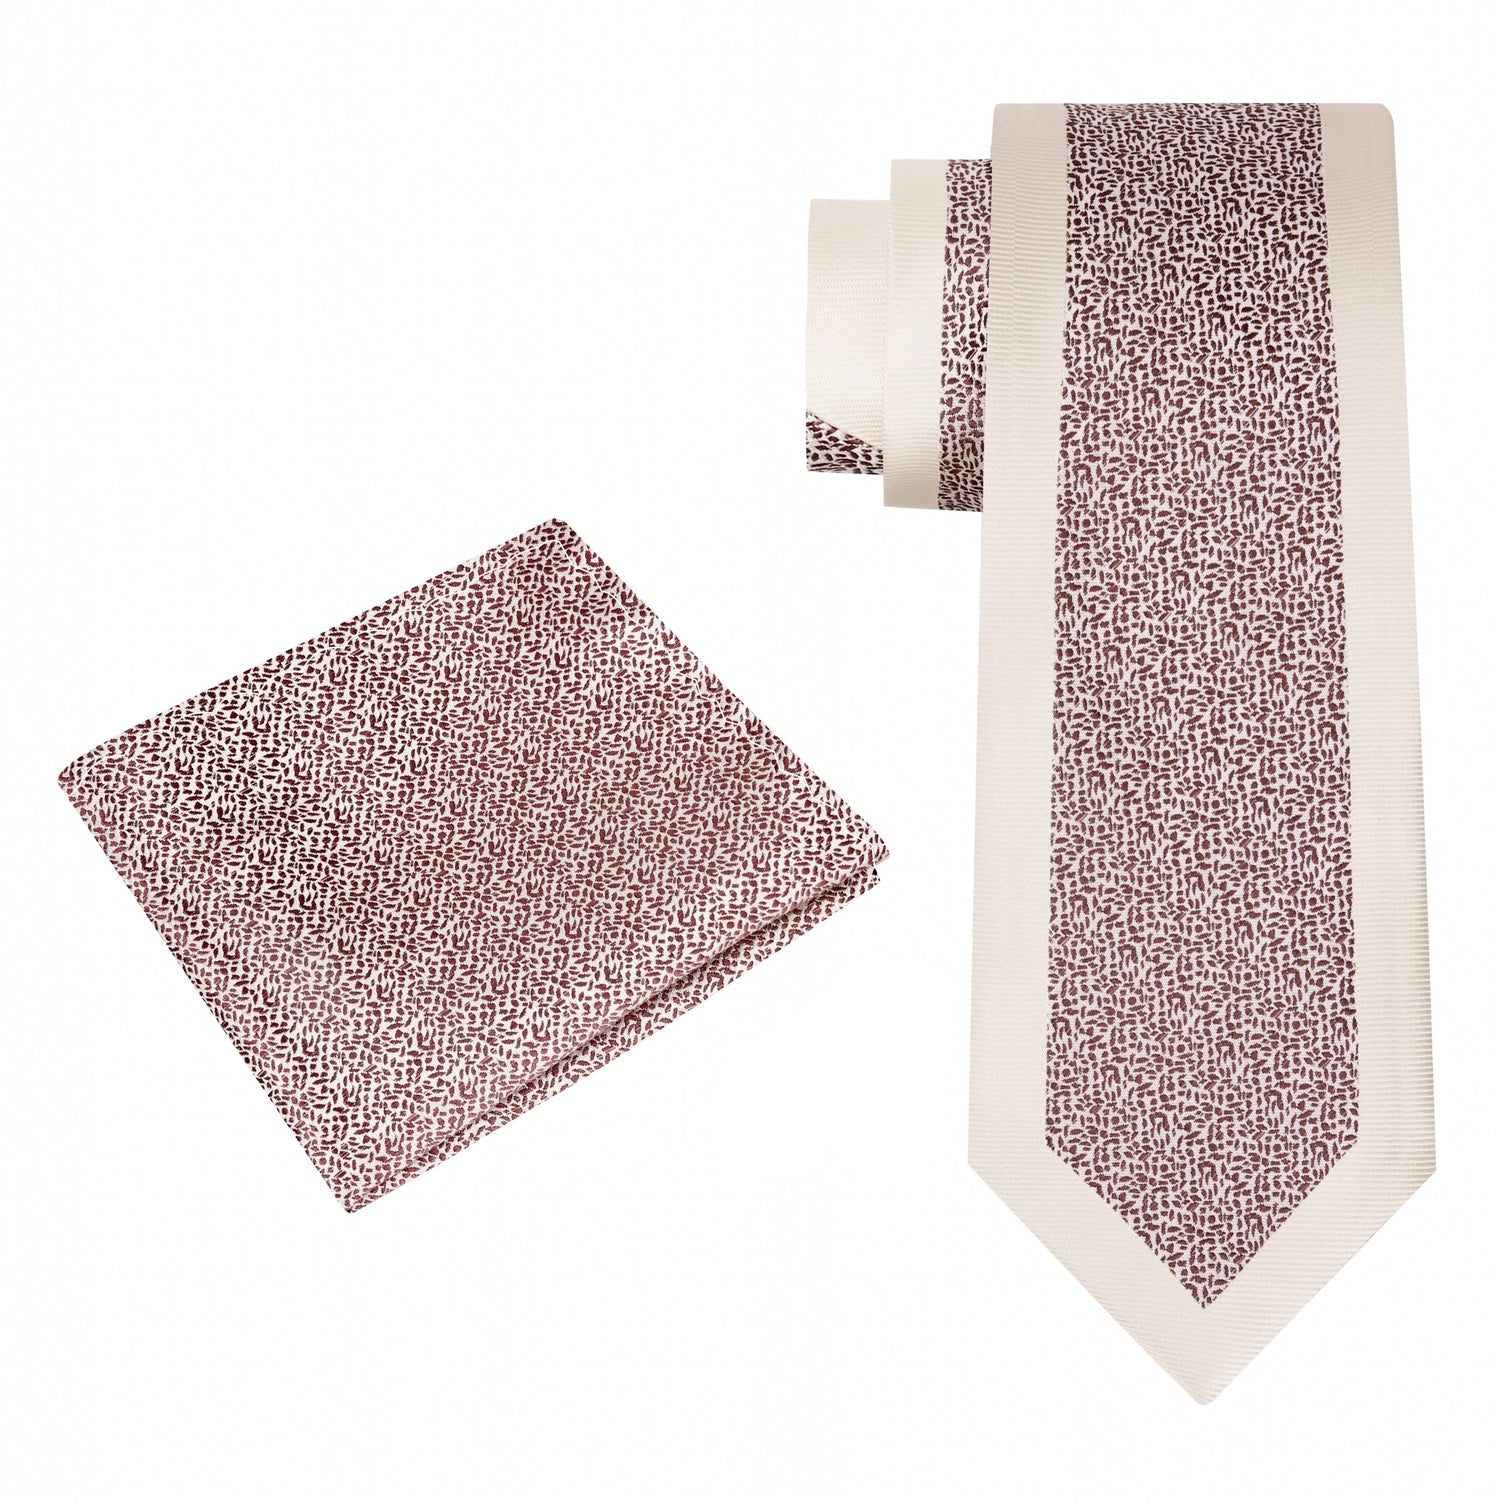 Alt View: Cream and Brown Tie and Square